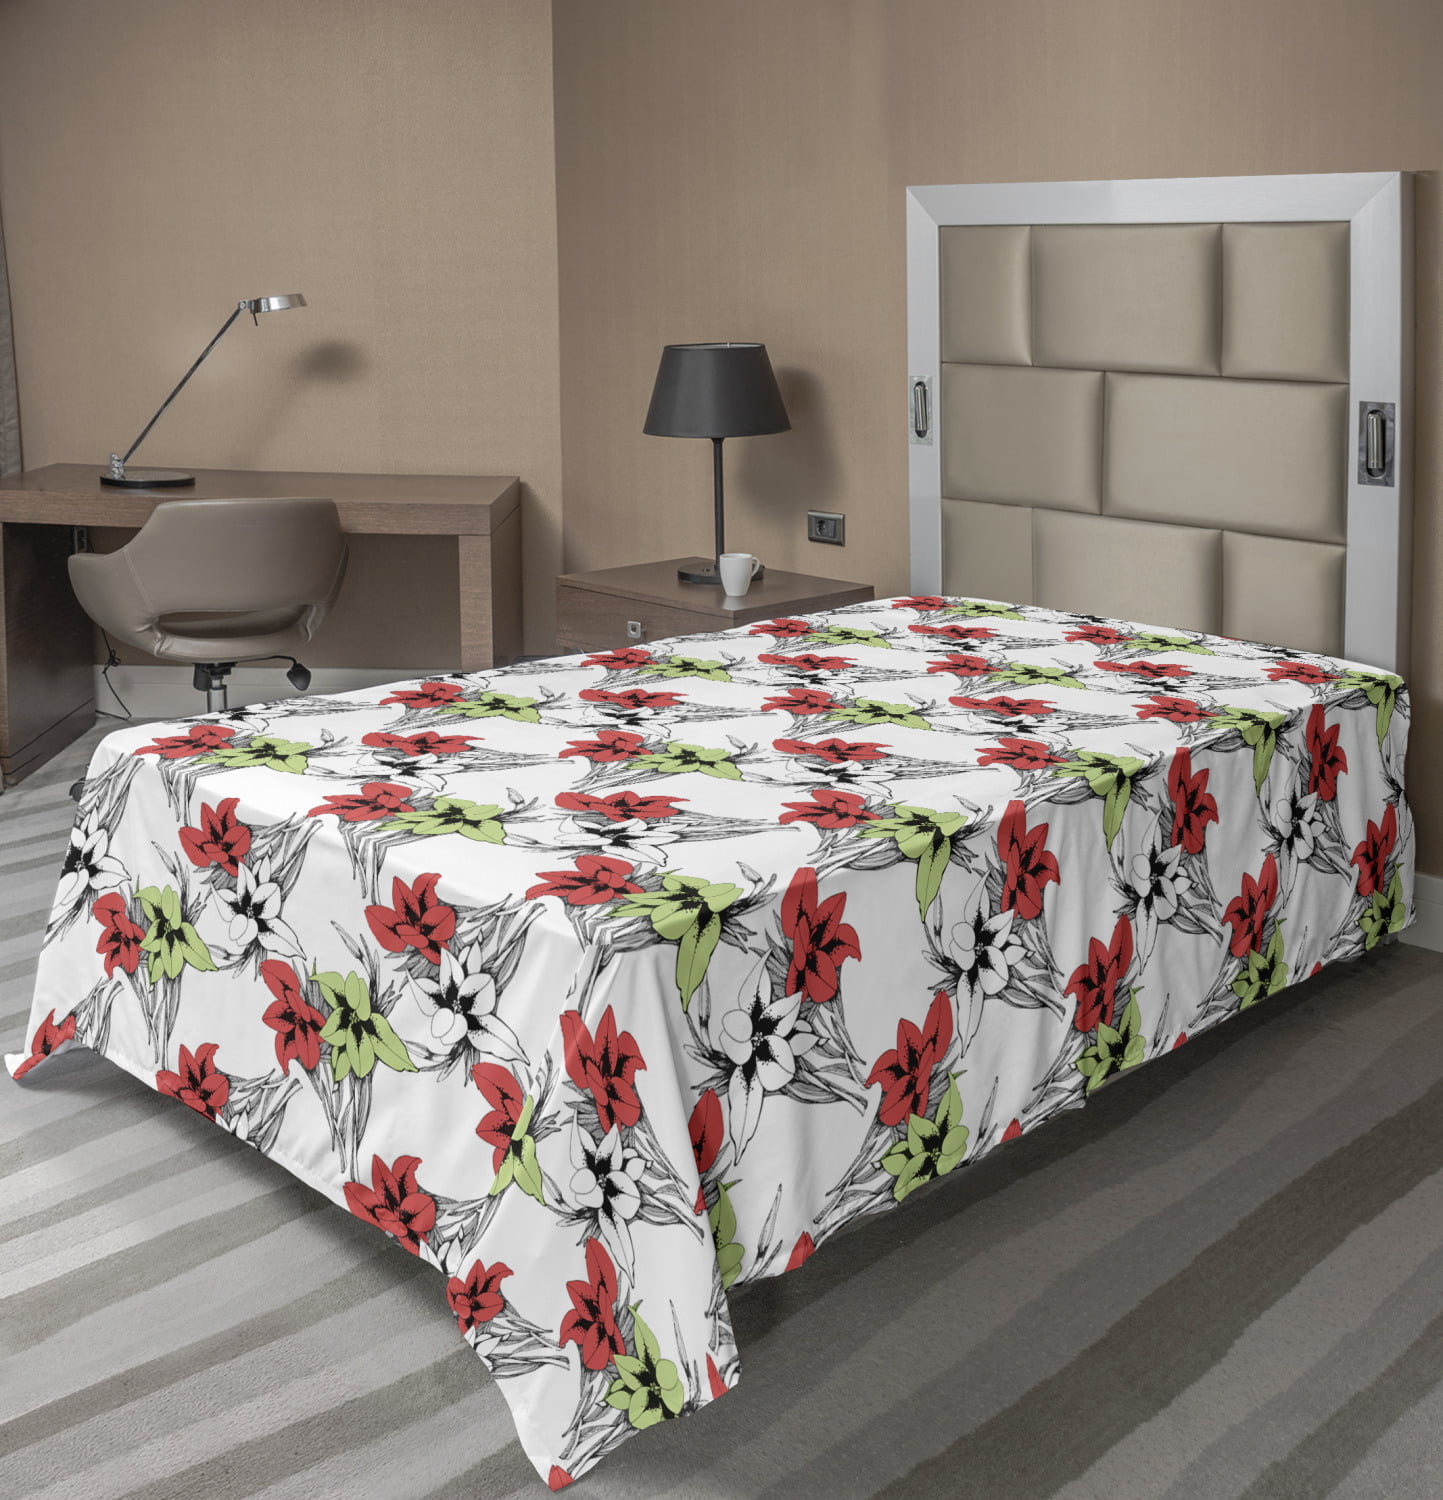 Floral Flat Sheet, Tropical and Blooming Elements with Sketchy Leaves ...